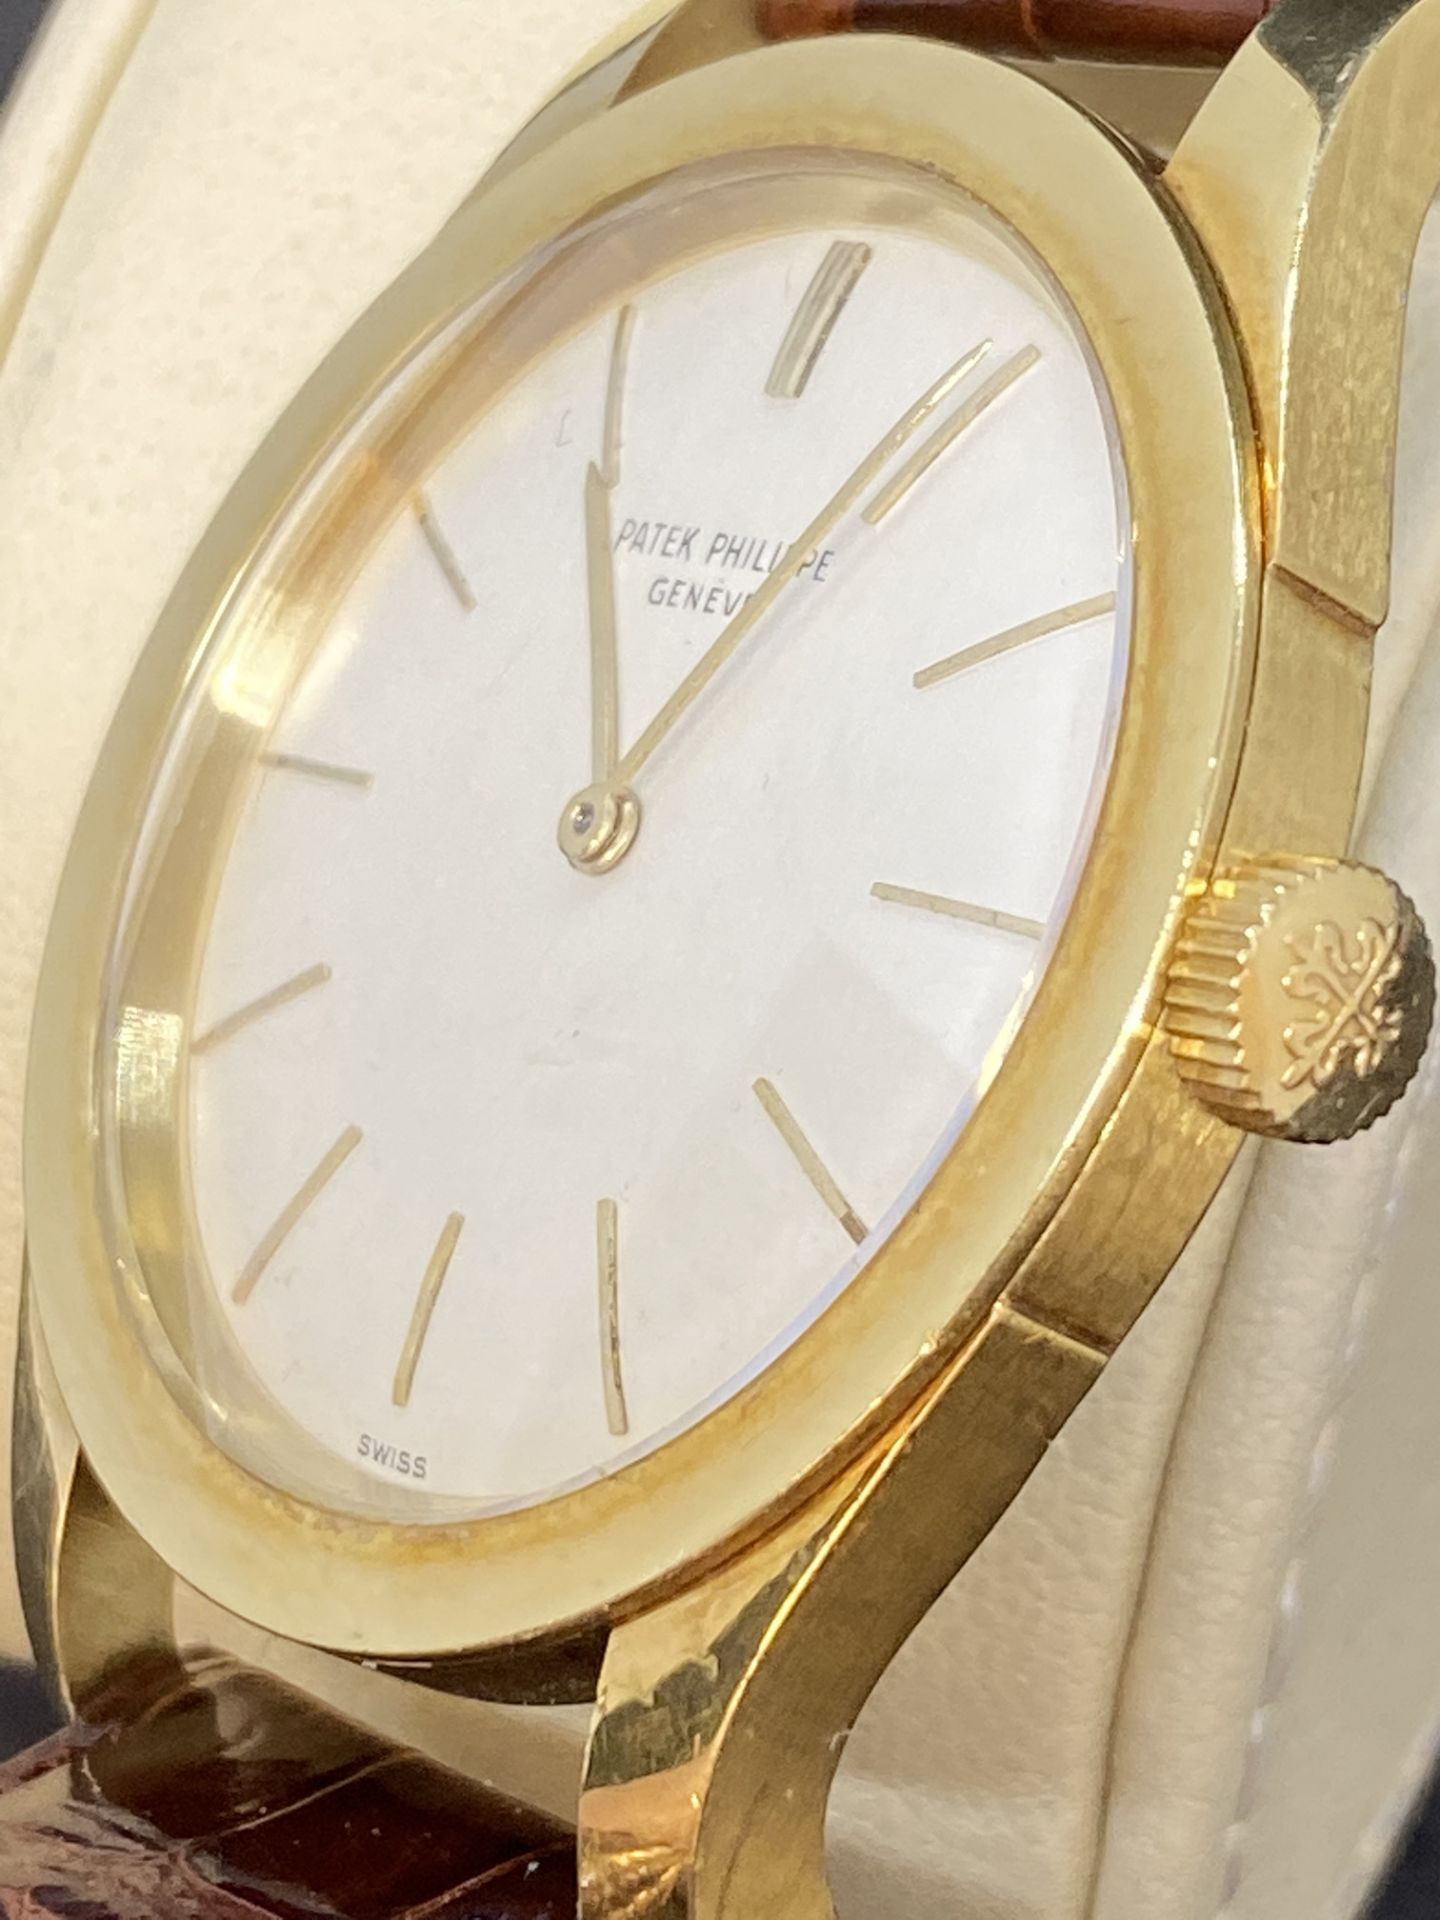 WATCH MARKED PATEK PHILIPPE 18ct GOLD WATCH - Image 10 of 11